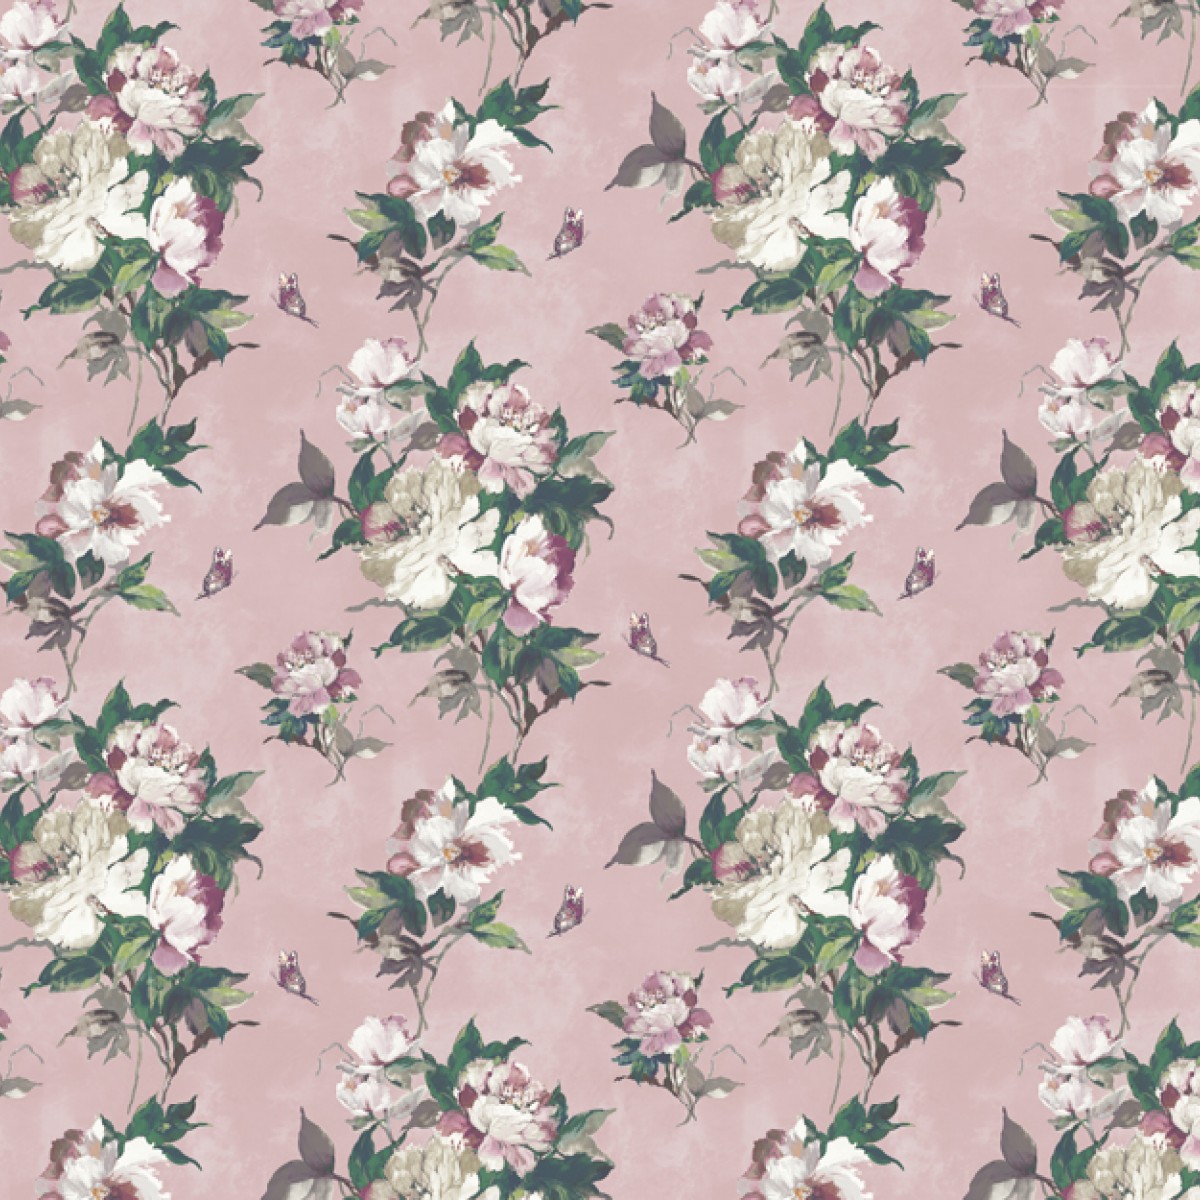 Tapet Madama Butterfly, Blush Pink Luxury Floral, 1838 Wallcoverings, 5.3mp / rola, Tapet living 